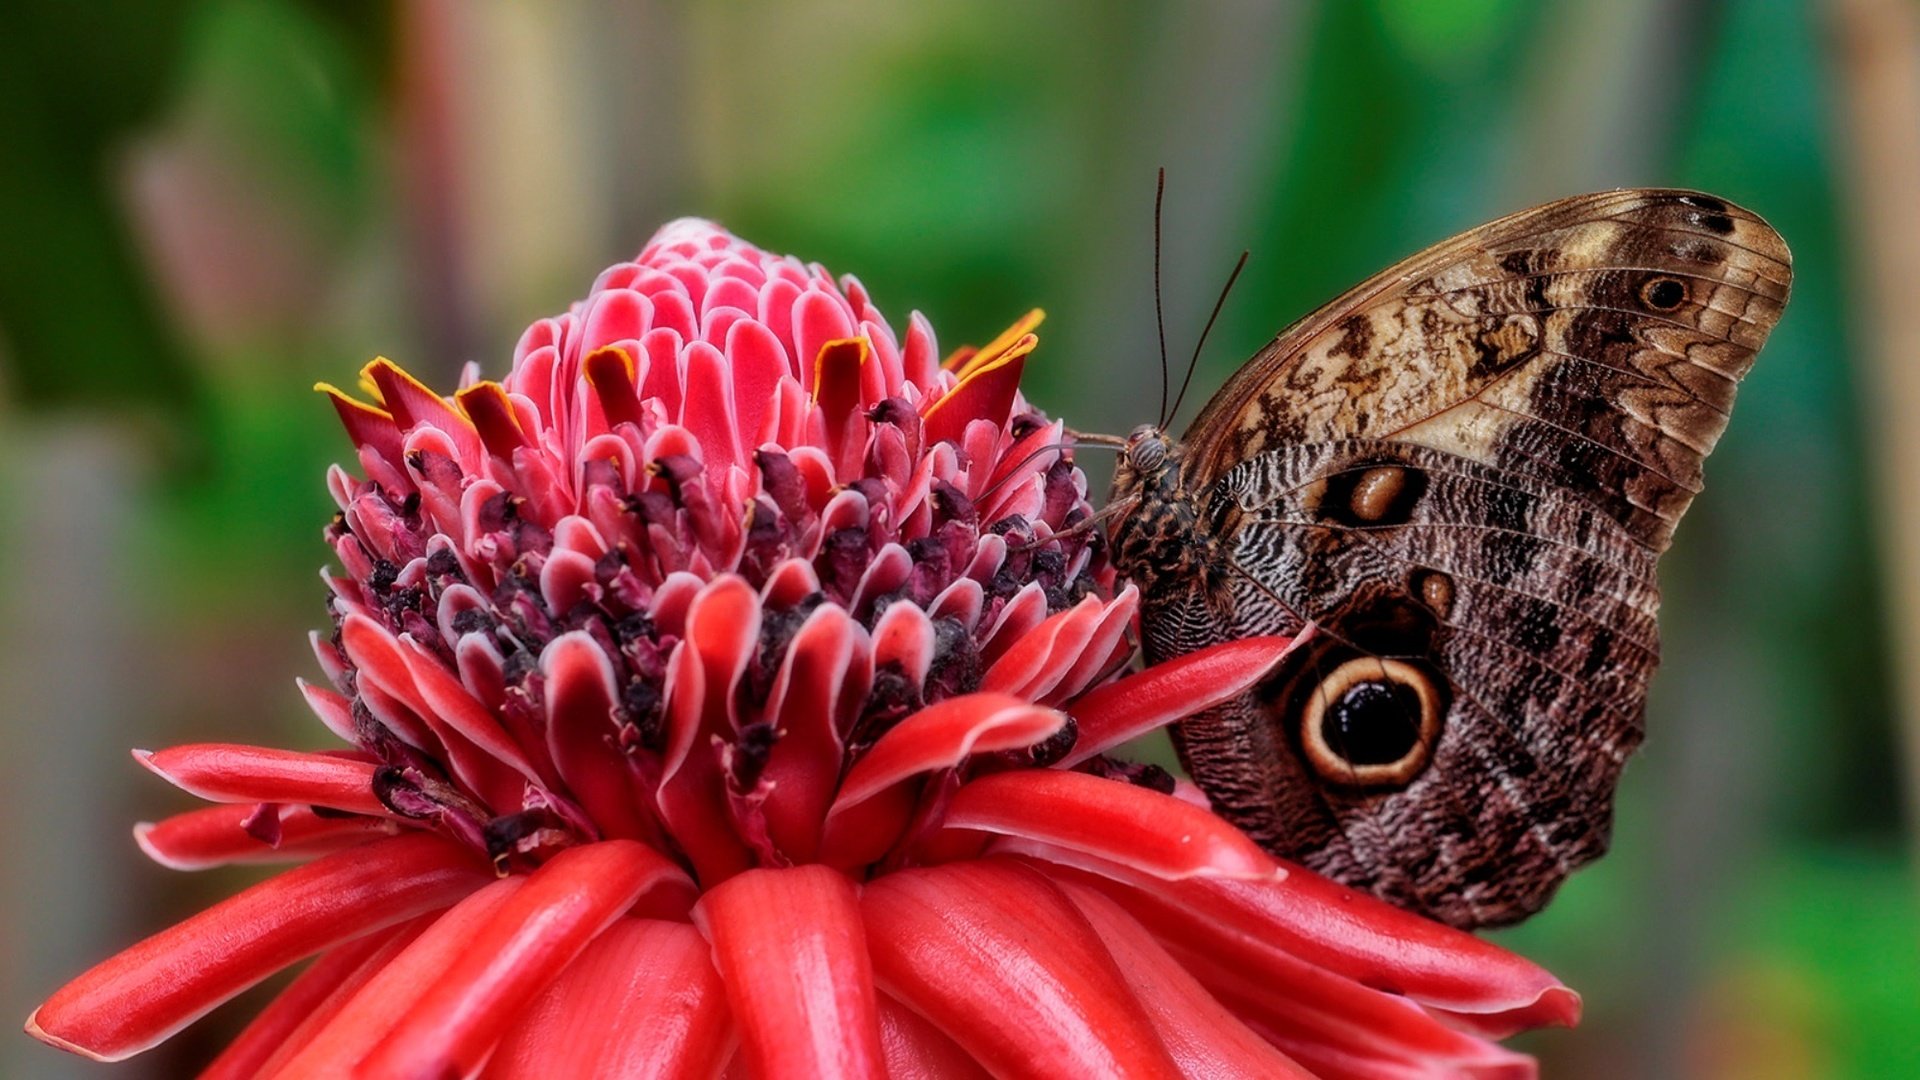 Download full hd 1920x1080 Butterfly computer wallpaper ID:167879 for free